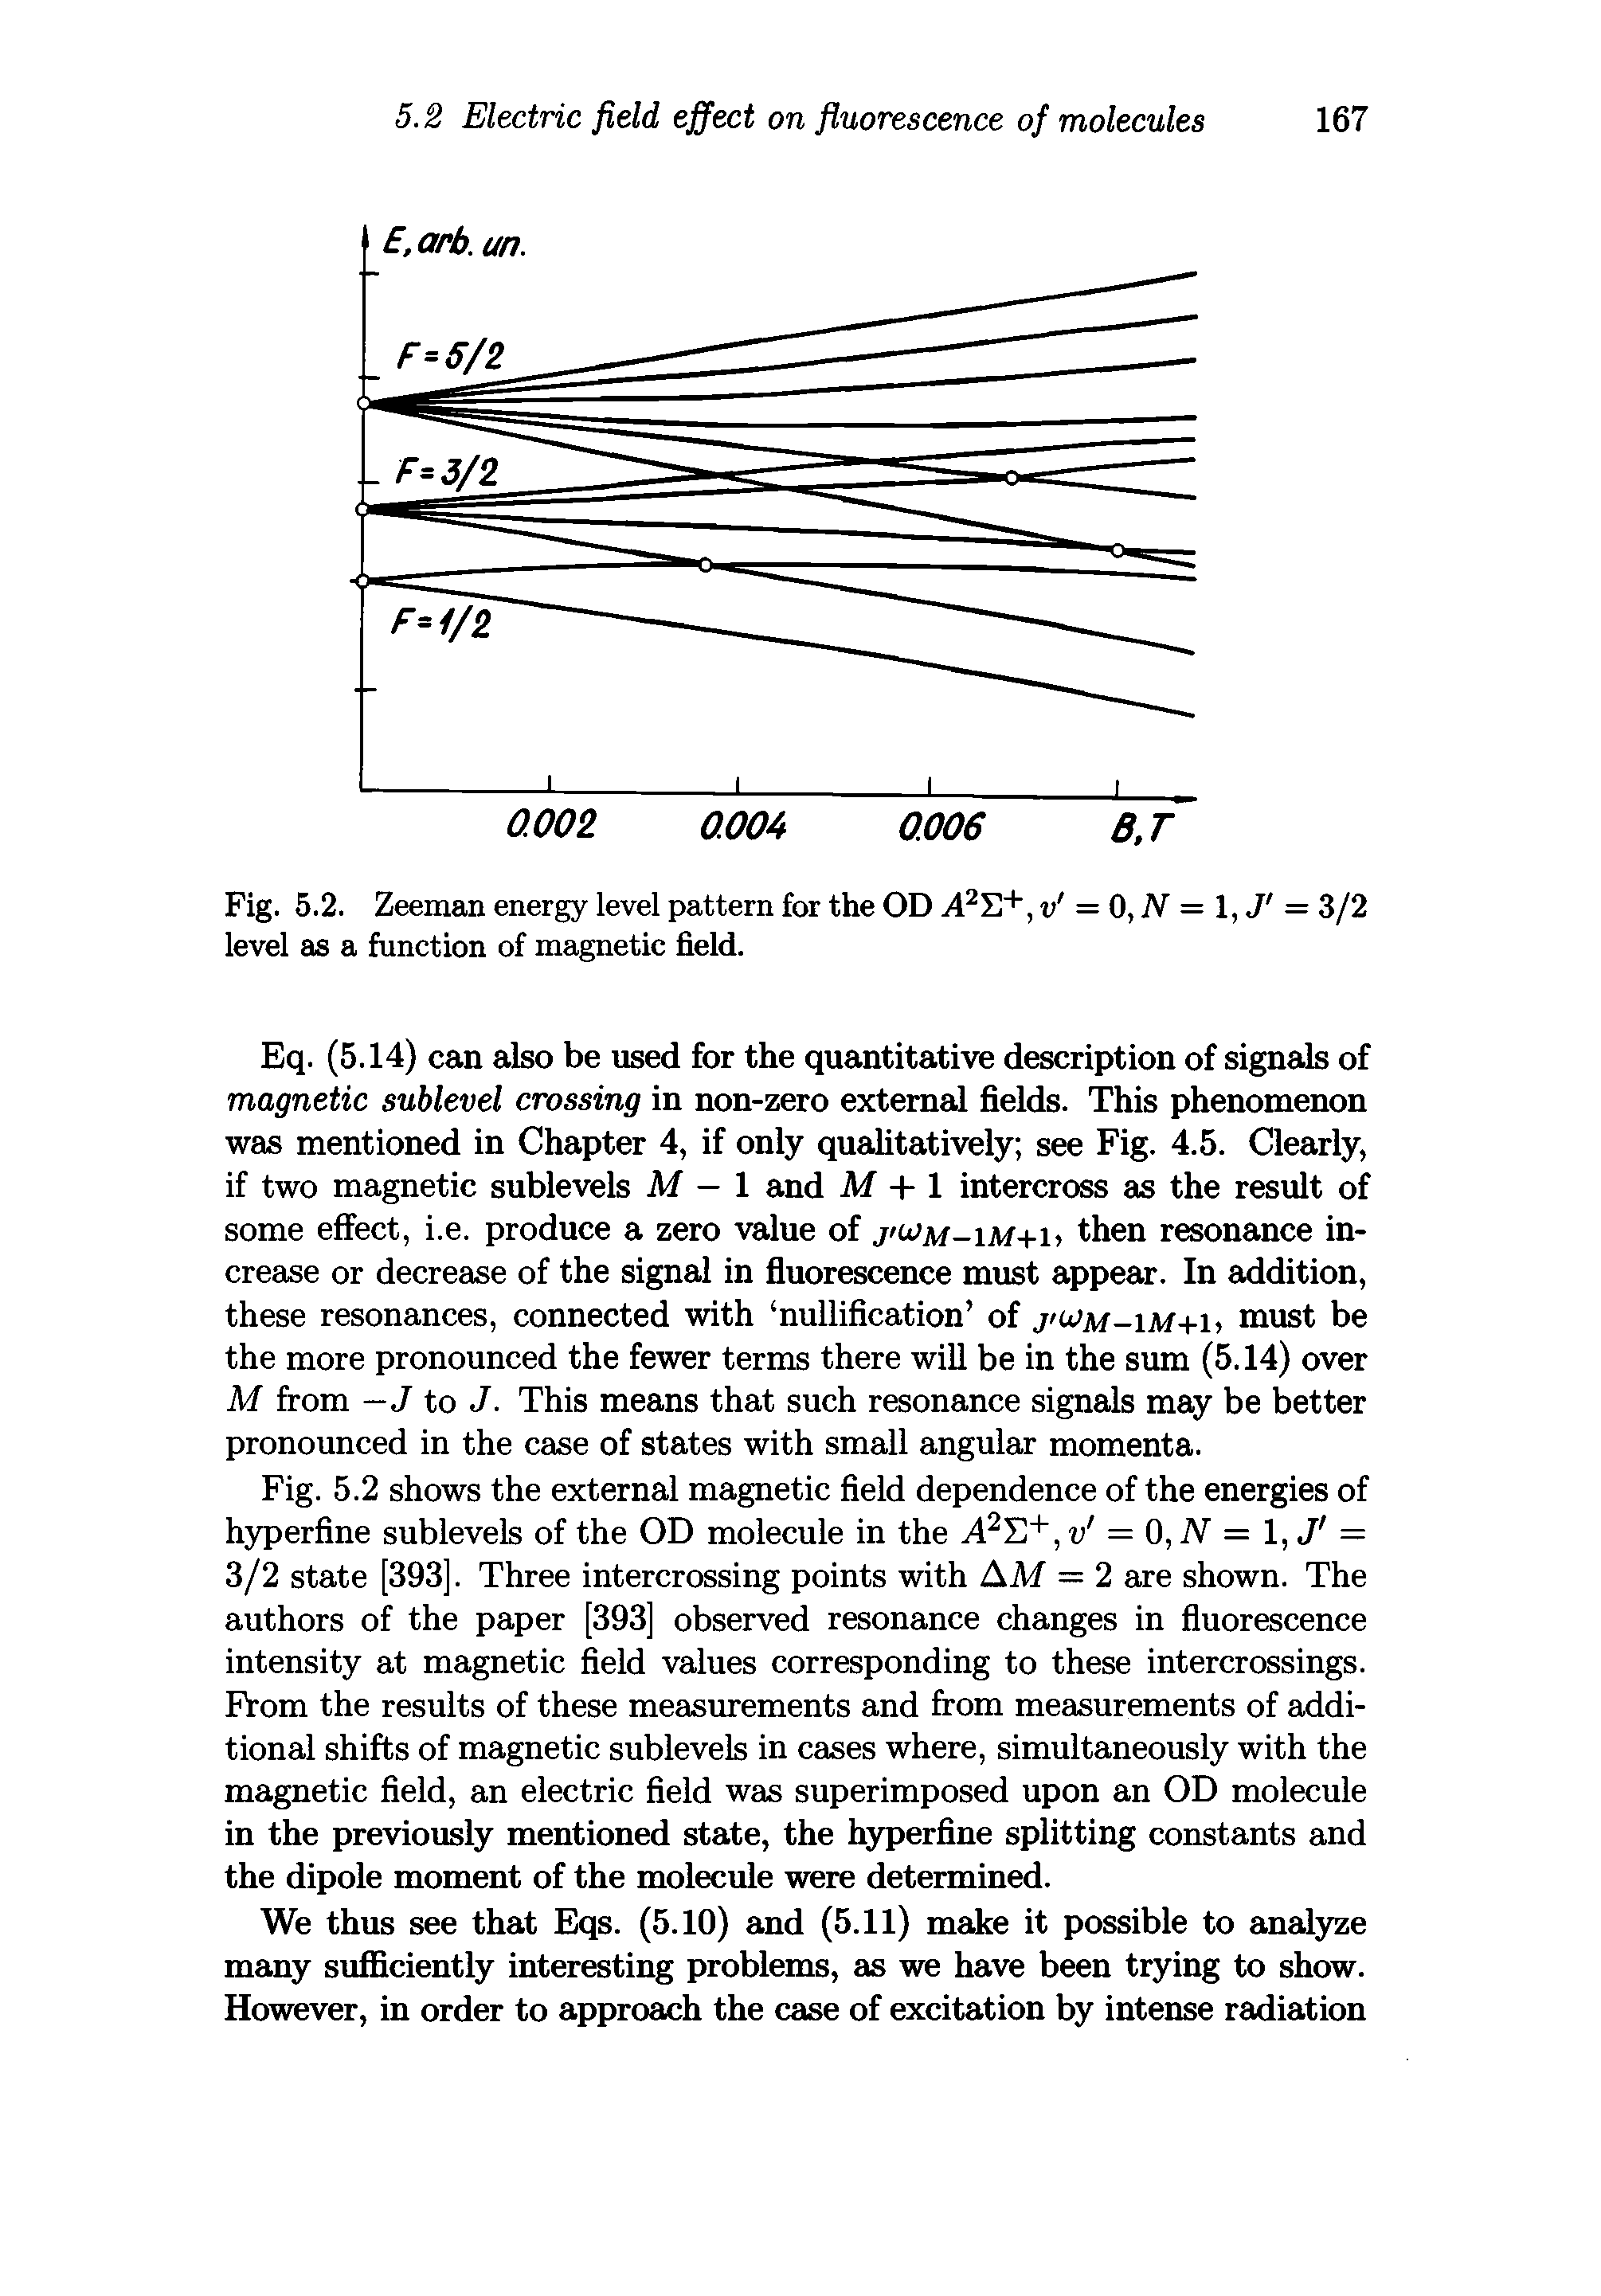 Fig. 5.2. Zeeman energy level pattern for the OD A2T,+, v = 0, IV = 1, J = 3/2 level as a function of magnetic field.